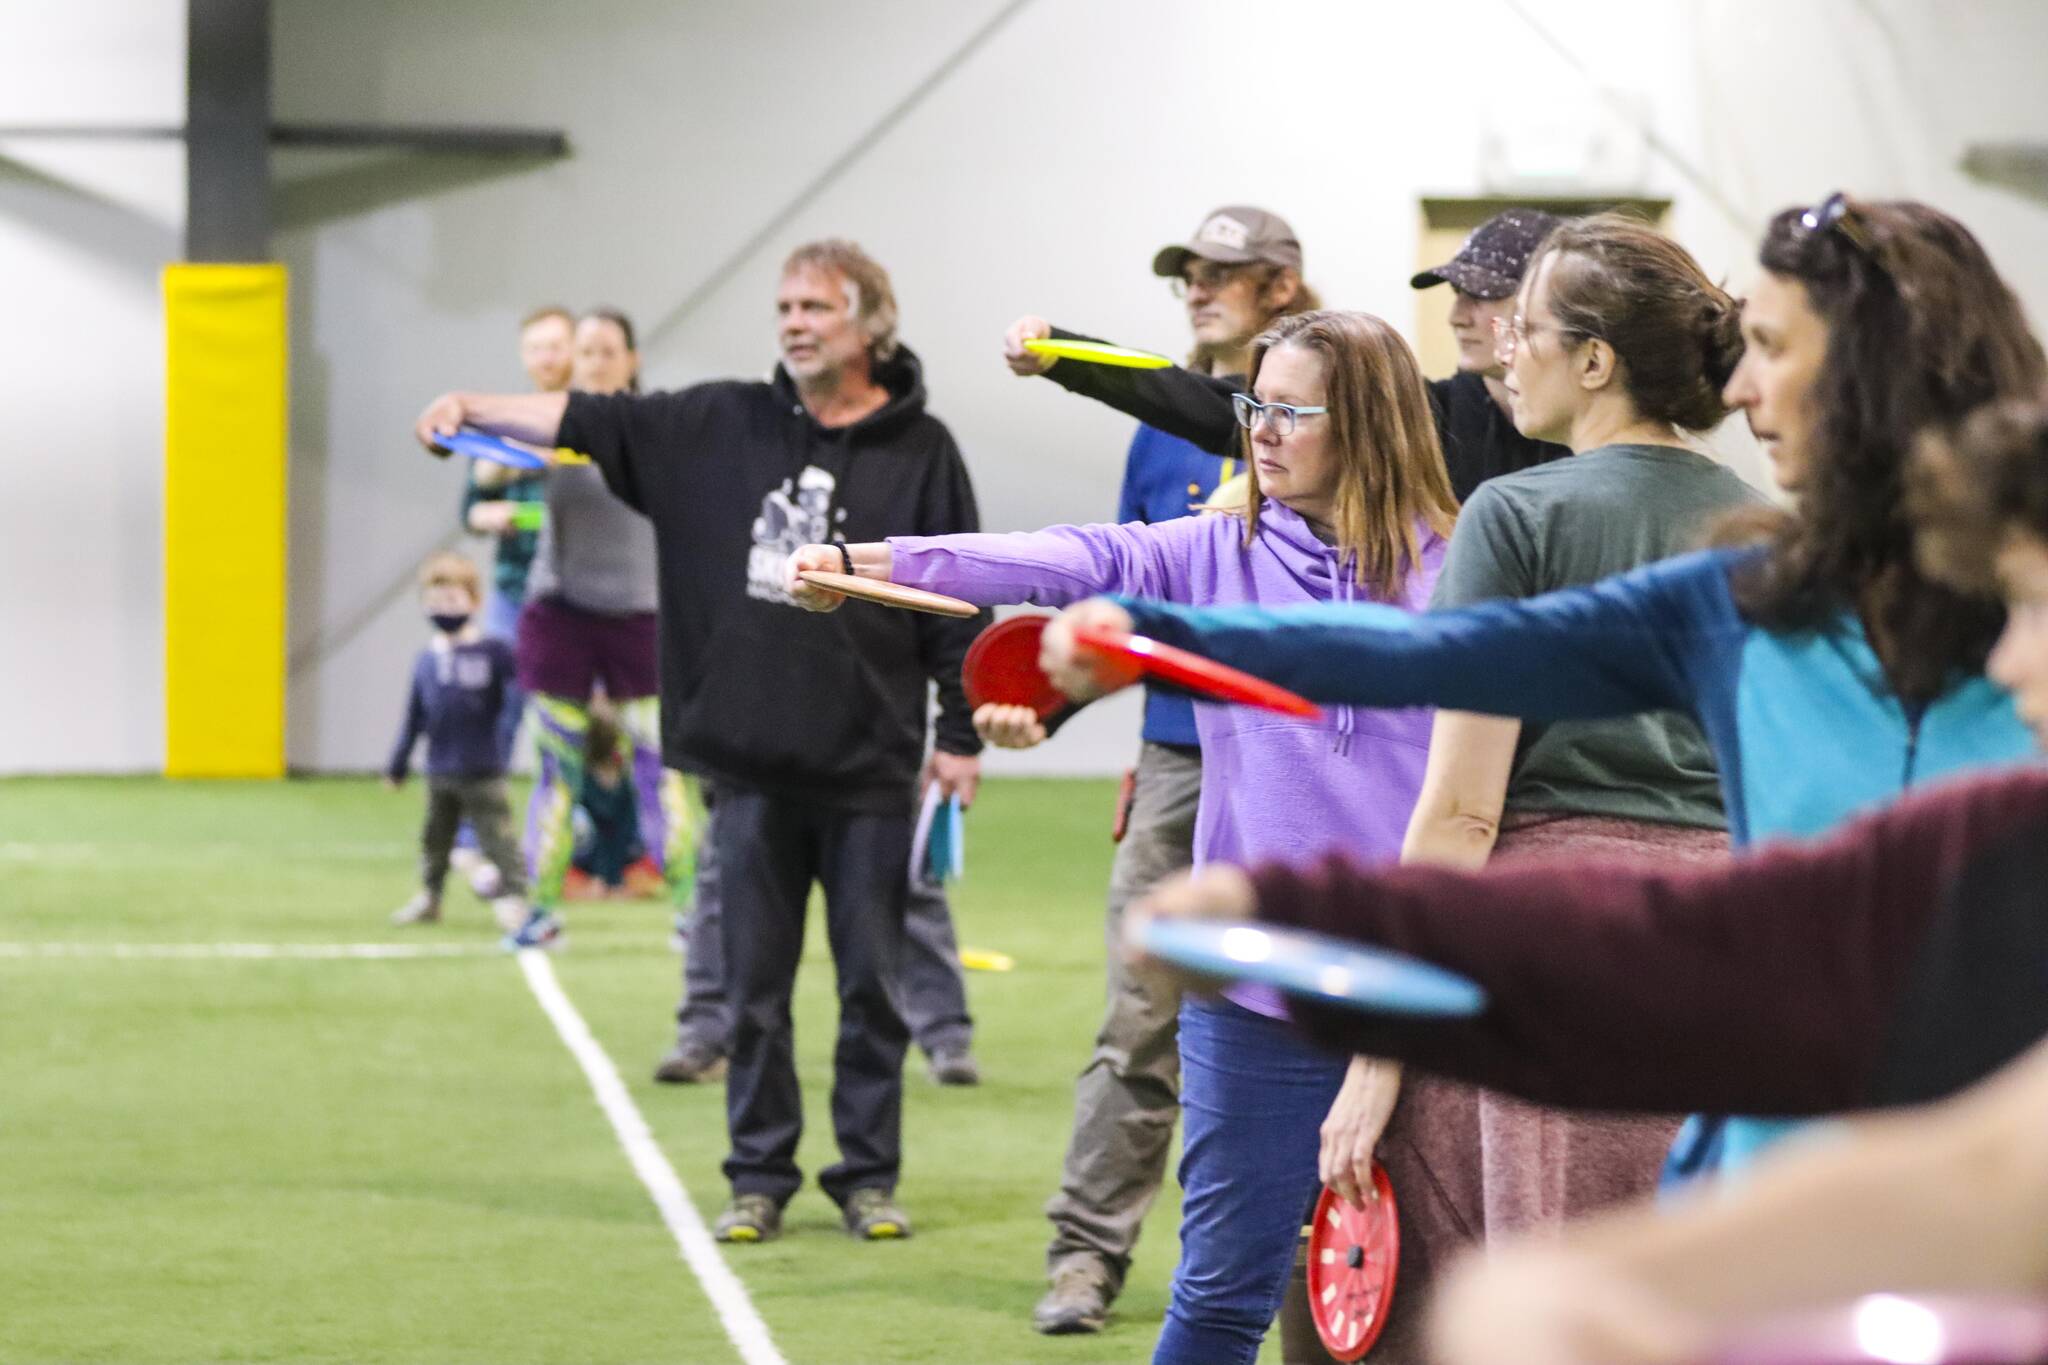 Michael S. Lockett / Juneau Empire
Players prepare to throw their discs during disc golf community workshop held by Uplay at at Dimond Park Field House on May 12, 2022.